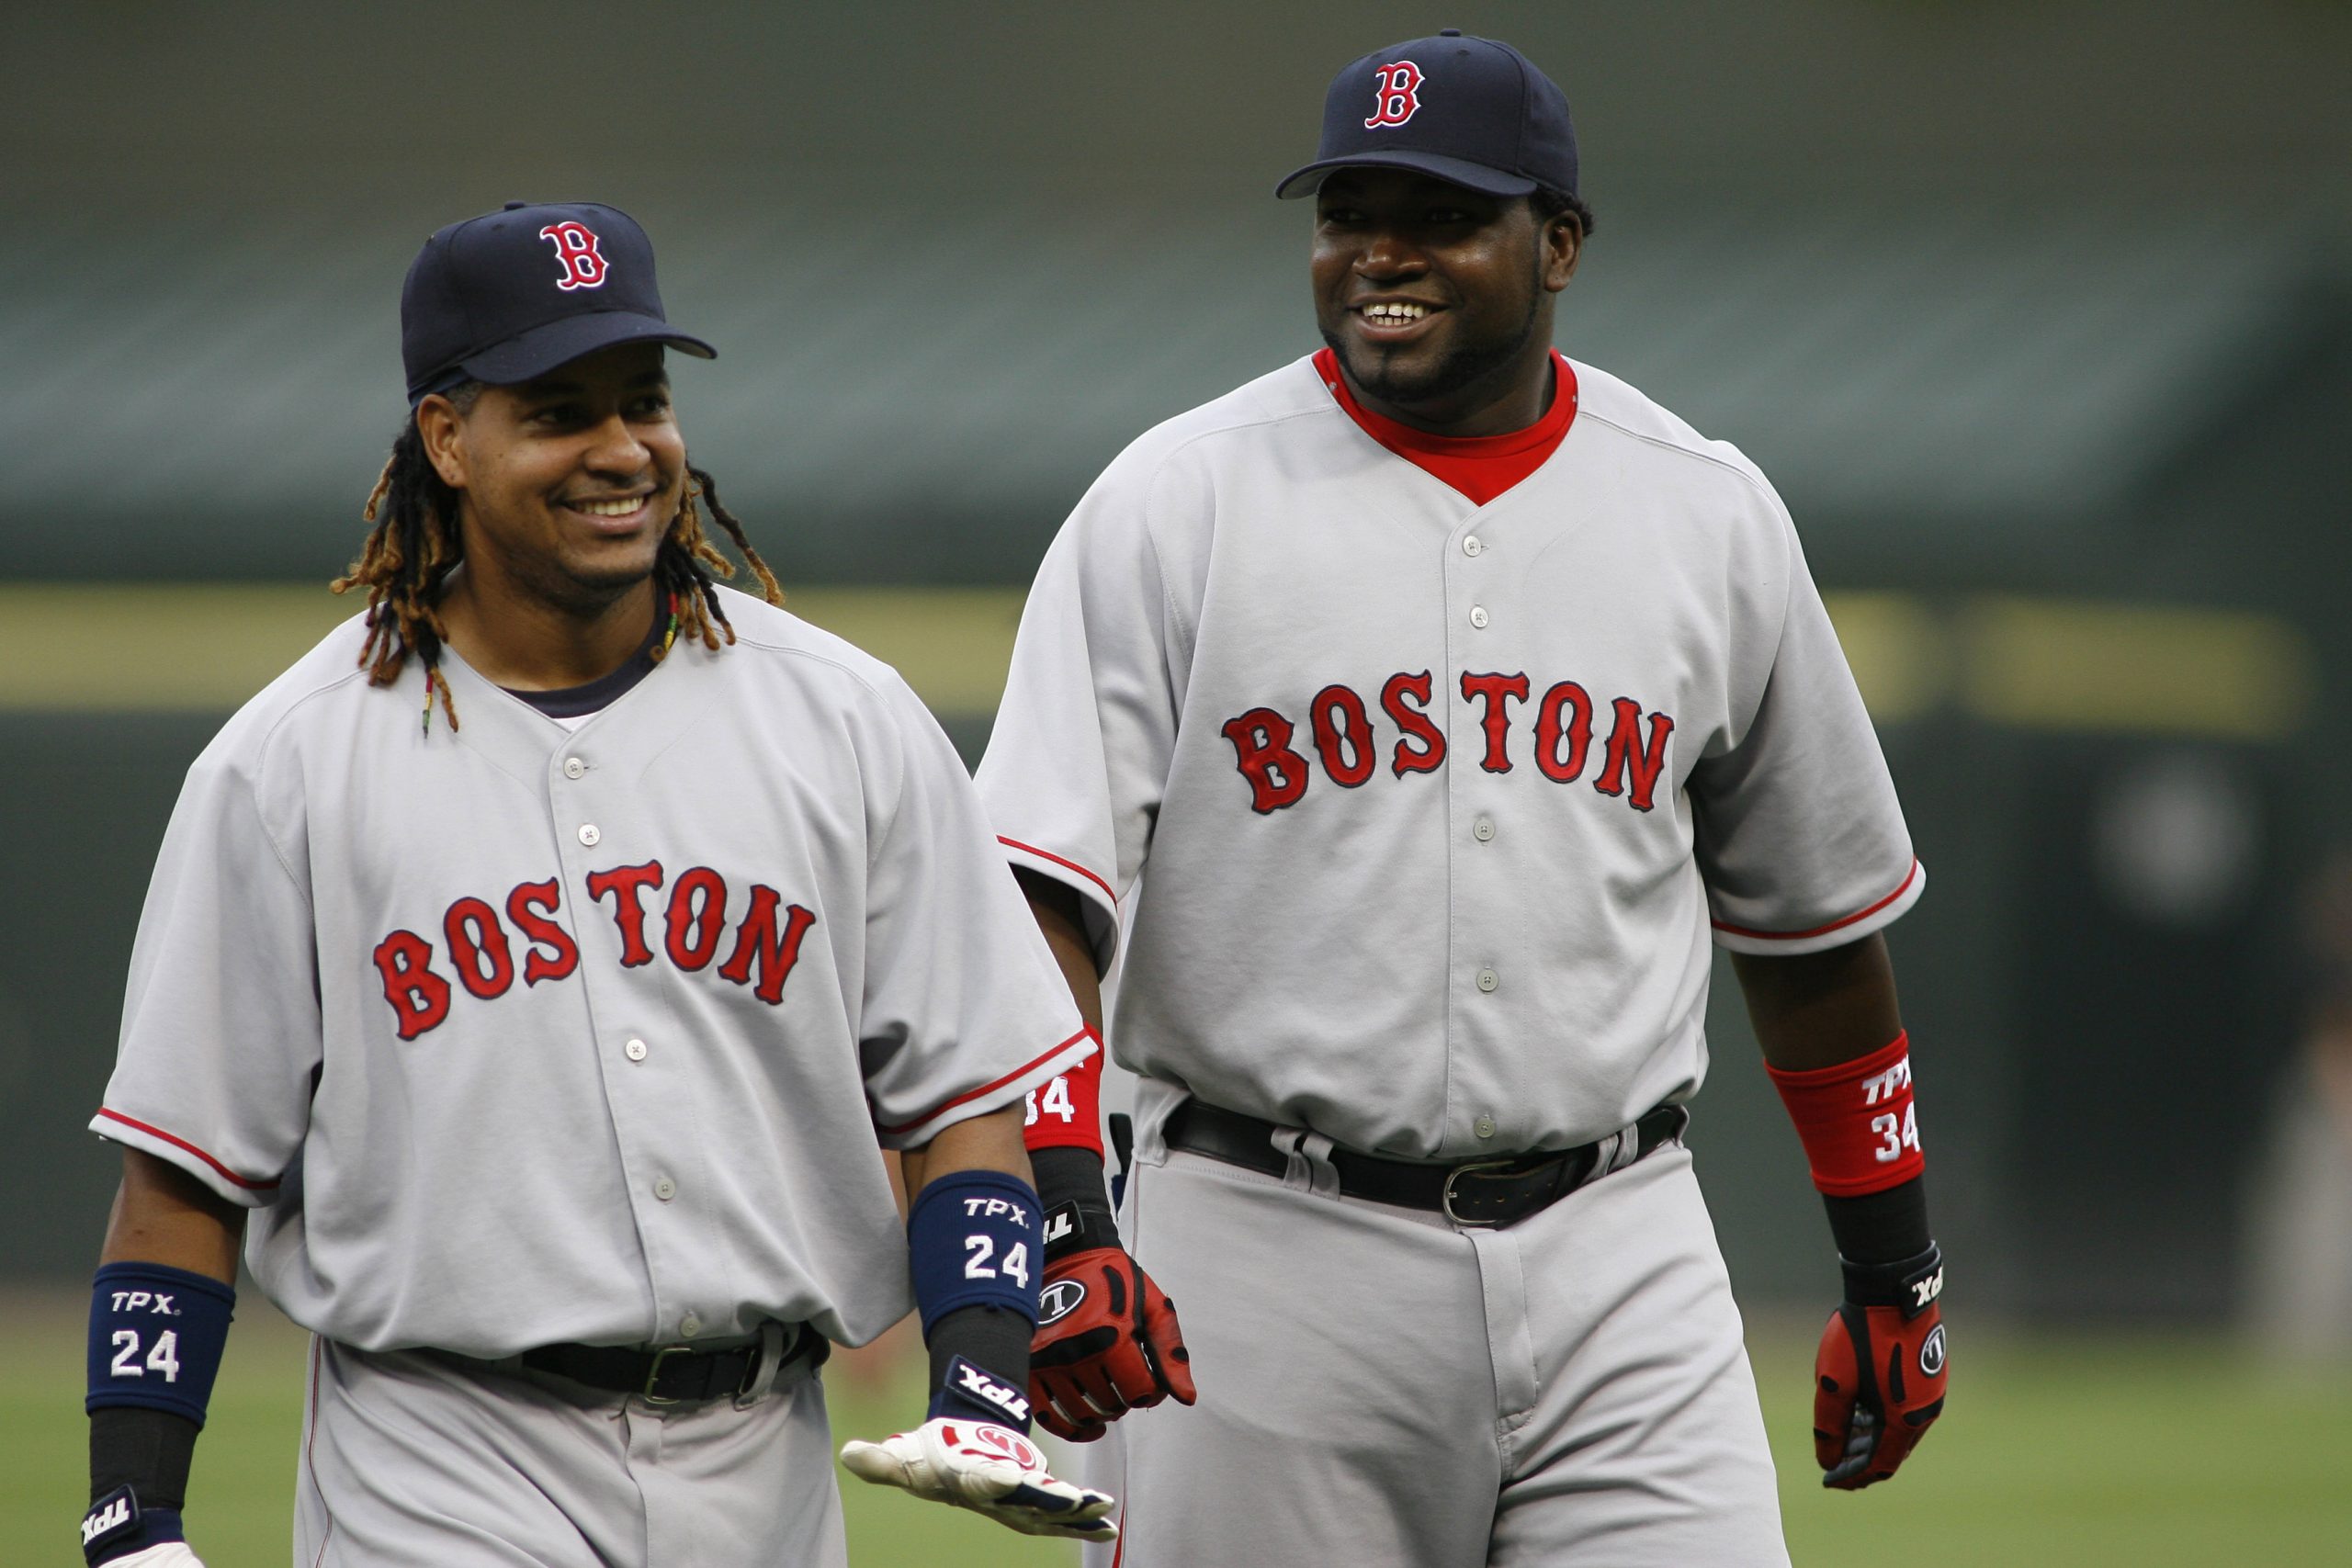 Boston Red Sox teammates, Manny Ramirez and David Ortiz, enjoy a laugh prior to the game against the Chicago White Sox July 7, 2006.